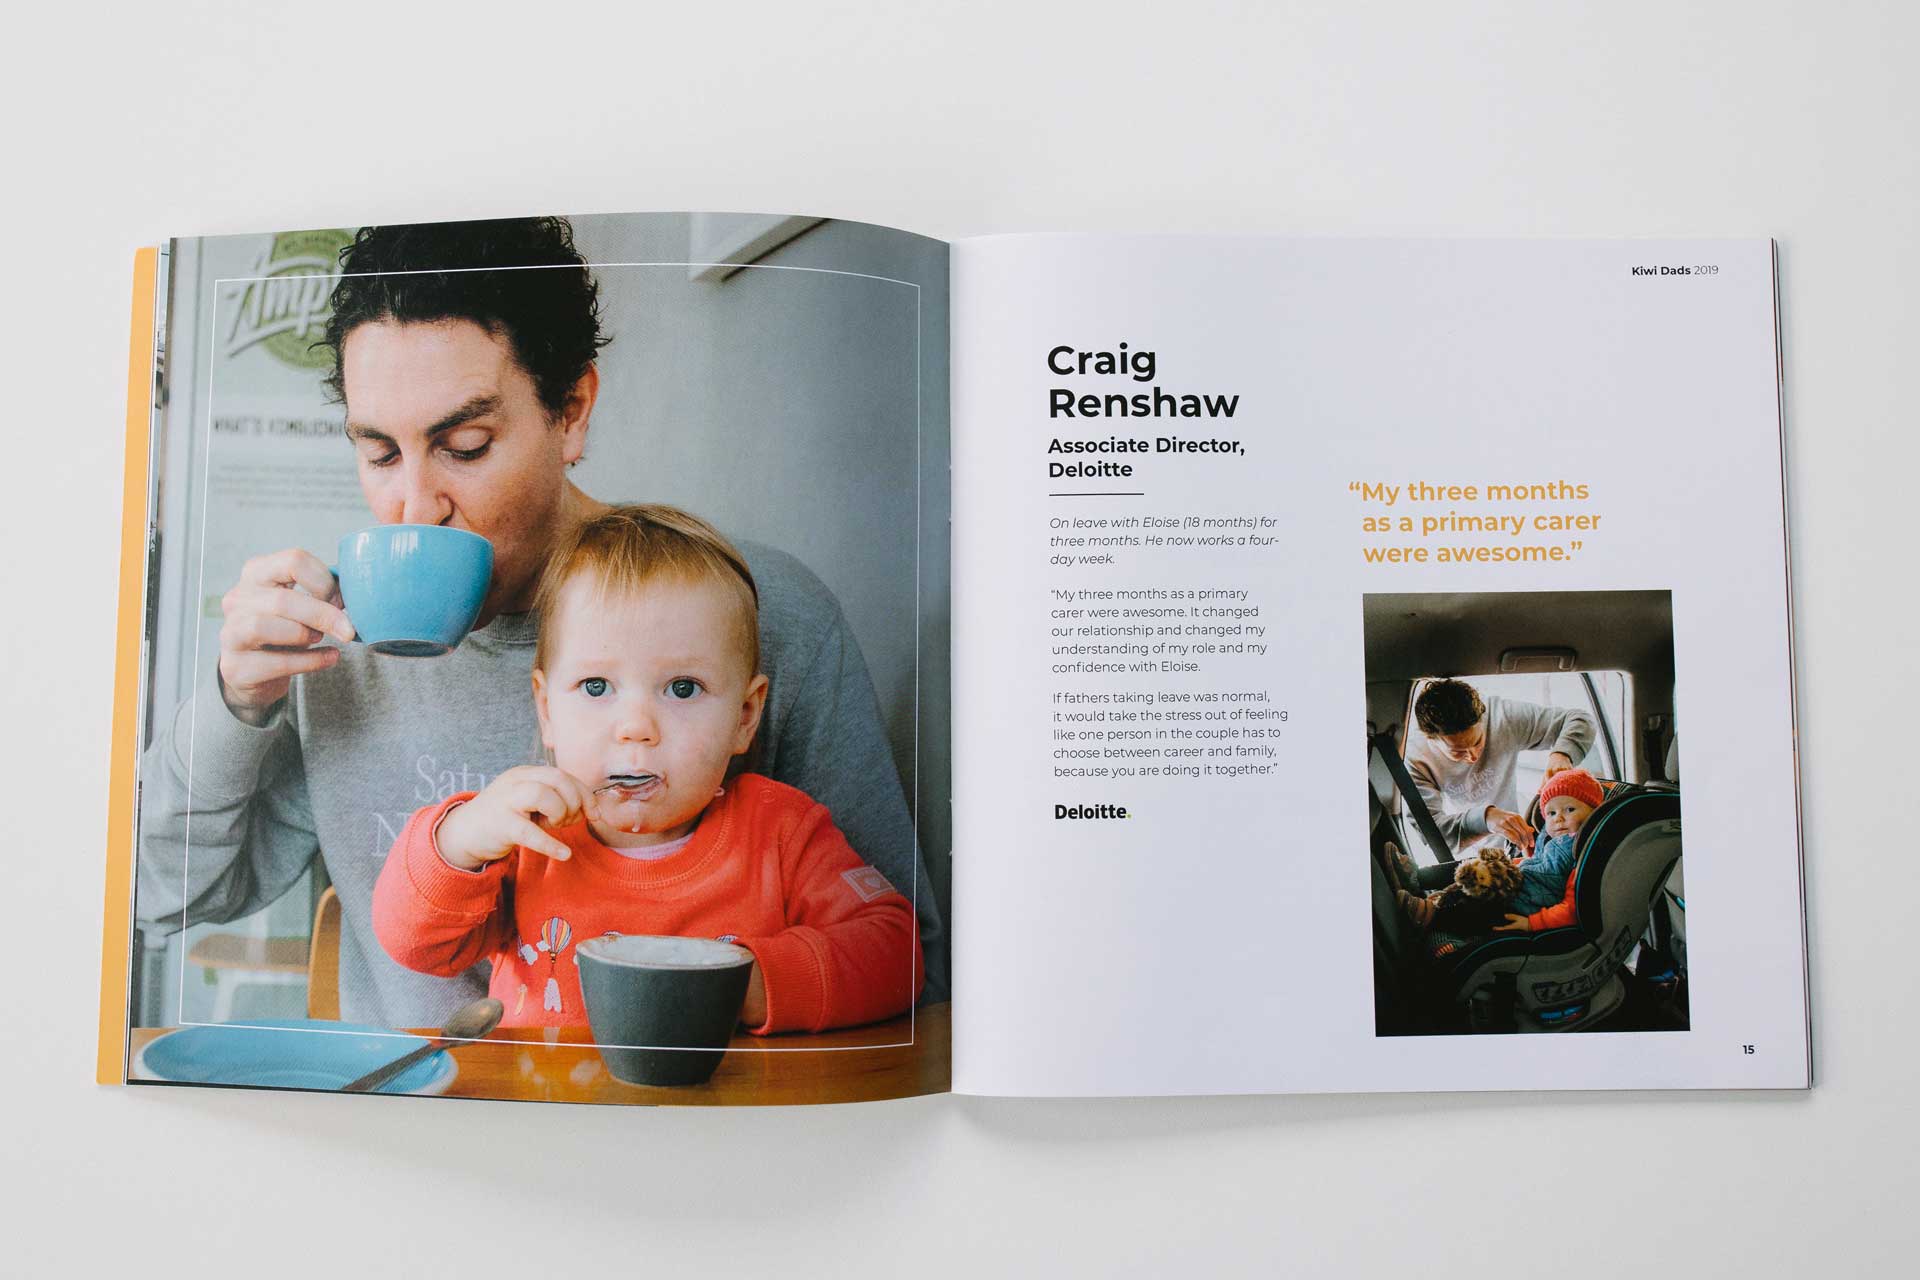 kiwi dads booklet photo of craig renshaw of deloitte having coffee with child photos by sarah weber photography